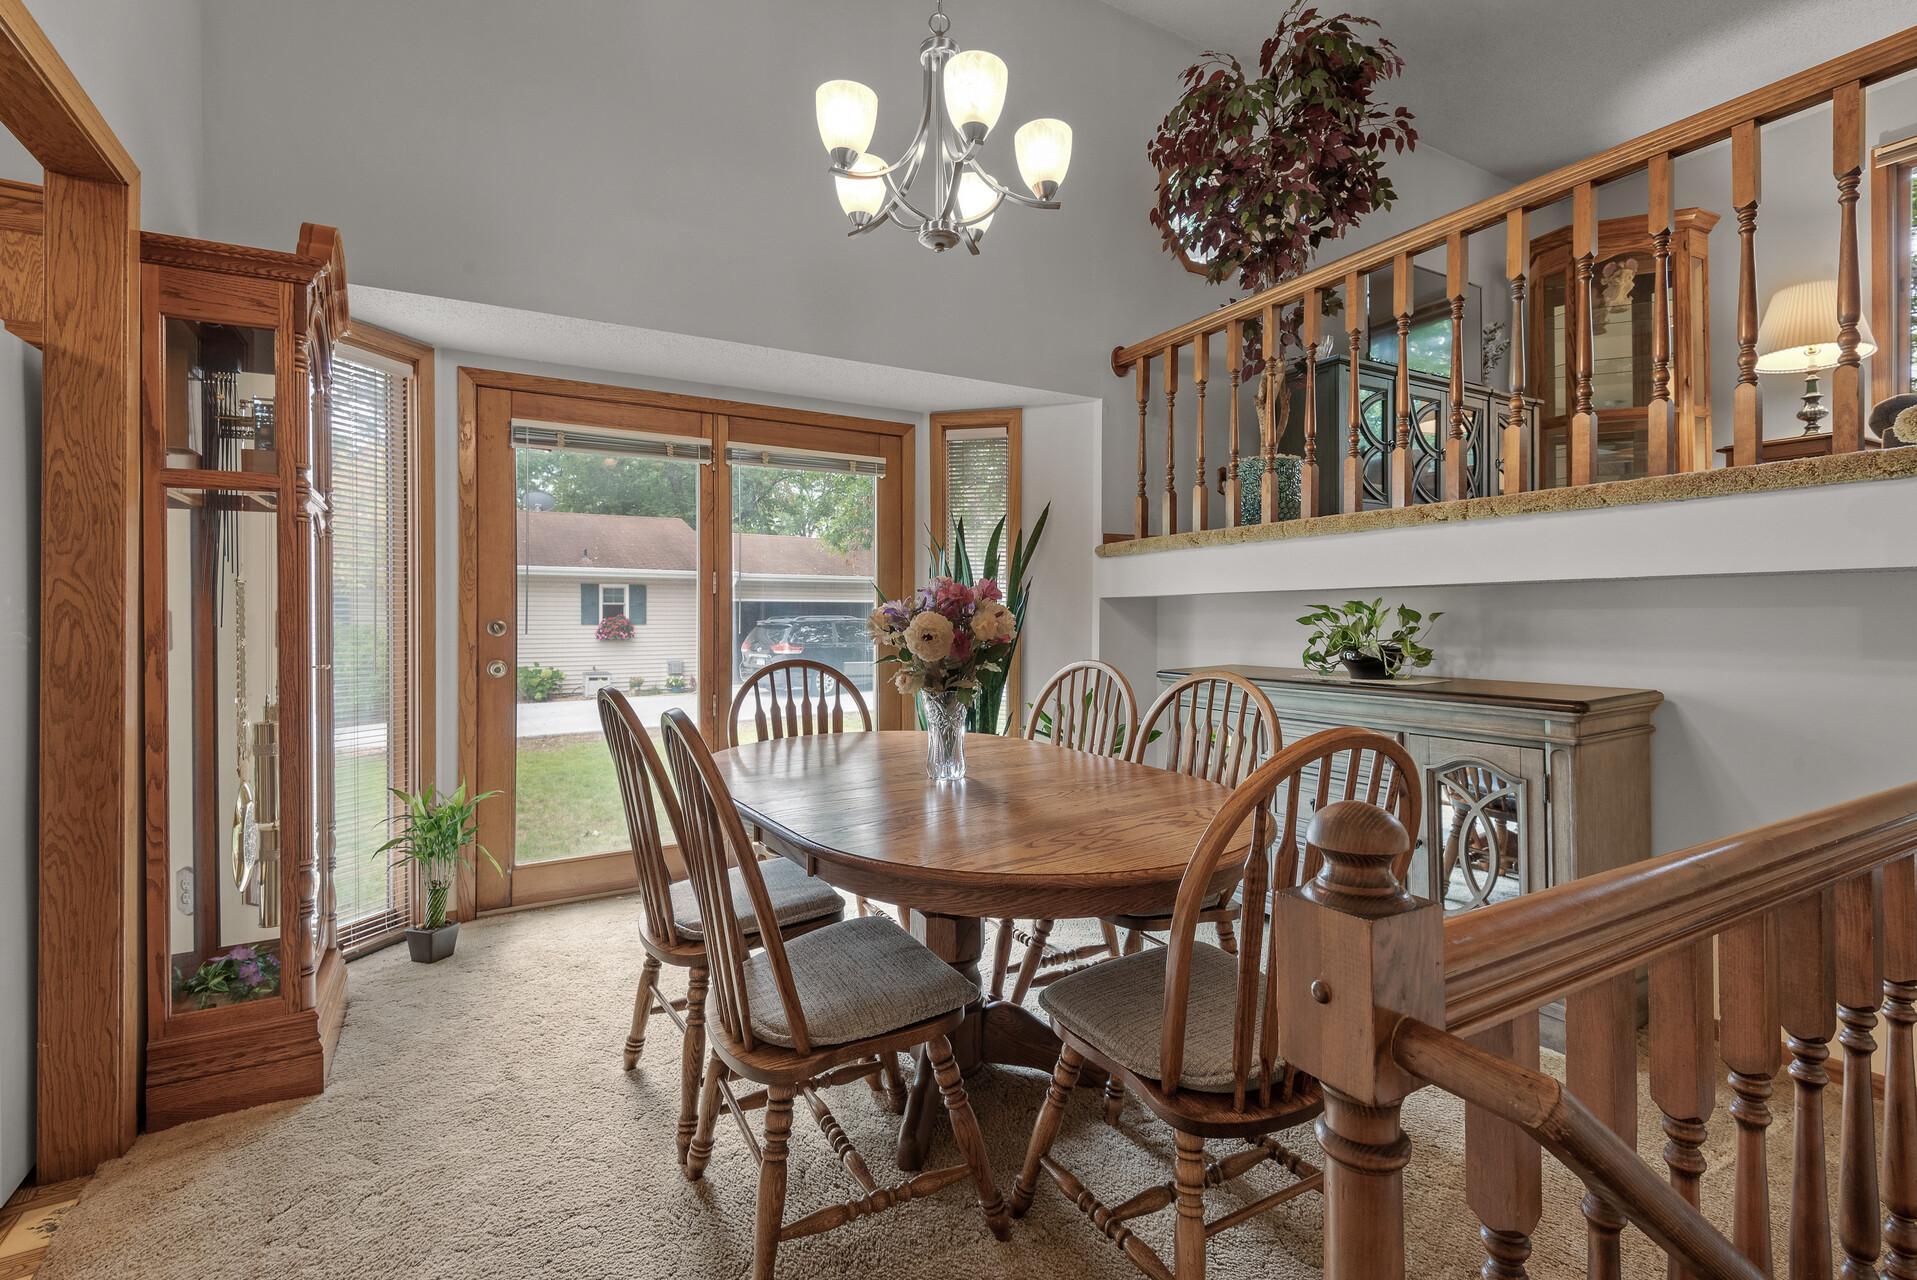 Sliding glass doors in the dining room lead out to the side of the home. Build your own styled deck, or leave as is for a functional access to the yard.